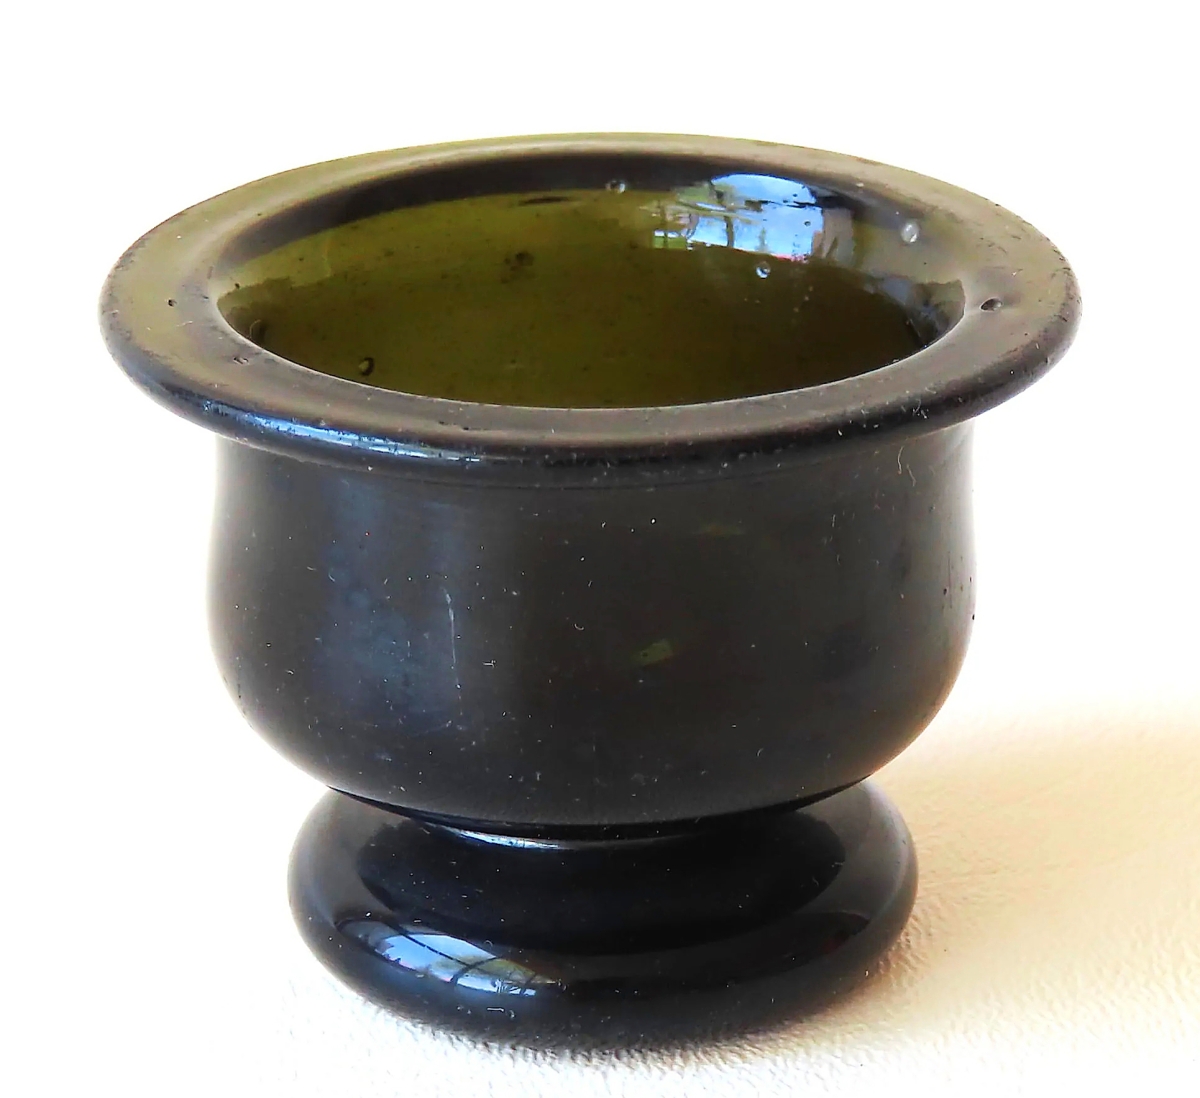 Leading all lots of American glass was this urn-form salt cellar in dark olive to amber color. It measured only 2 inches high and brought $3,063.